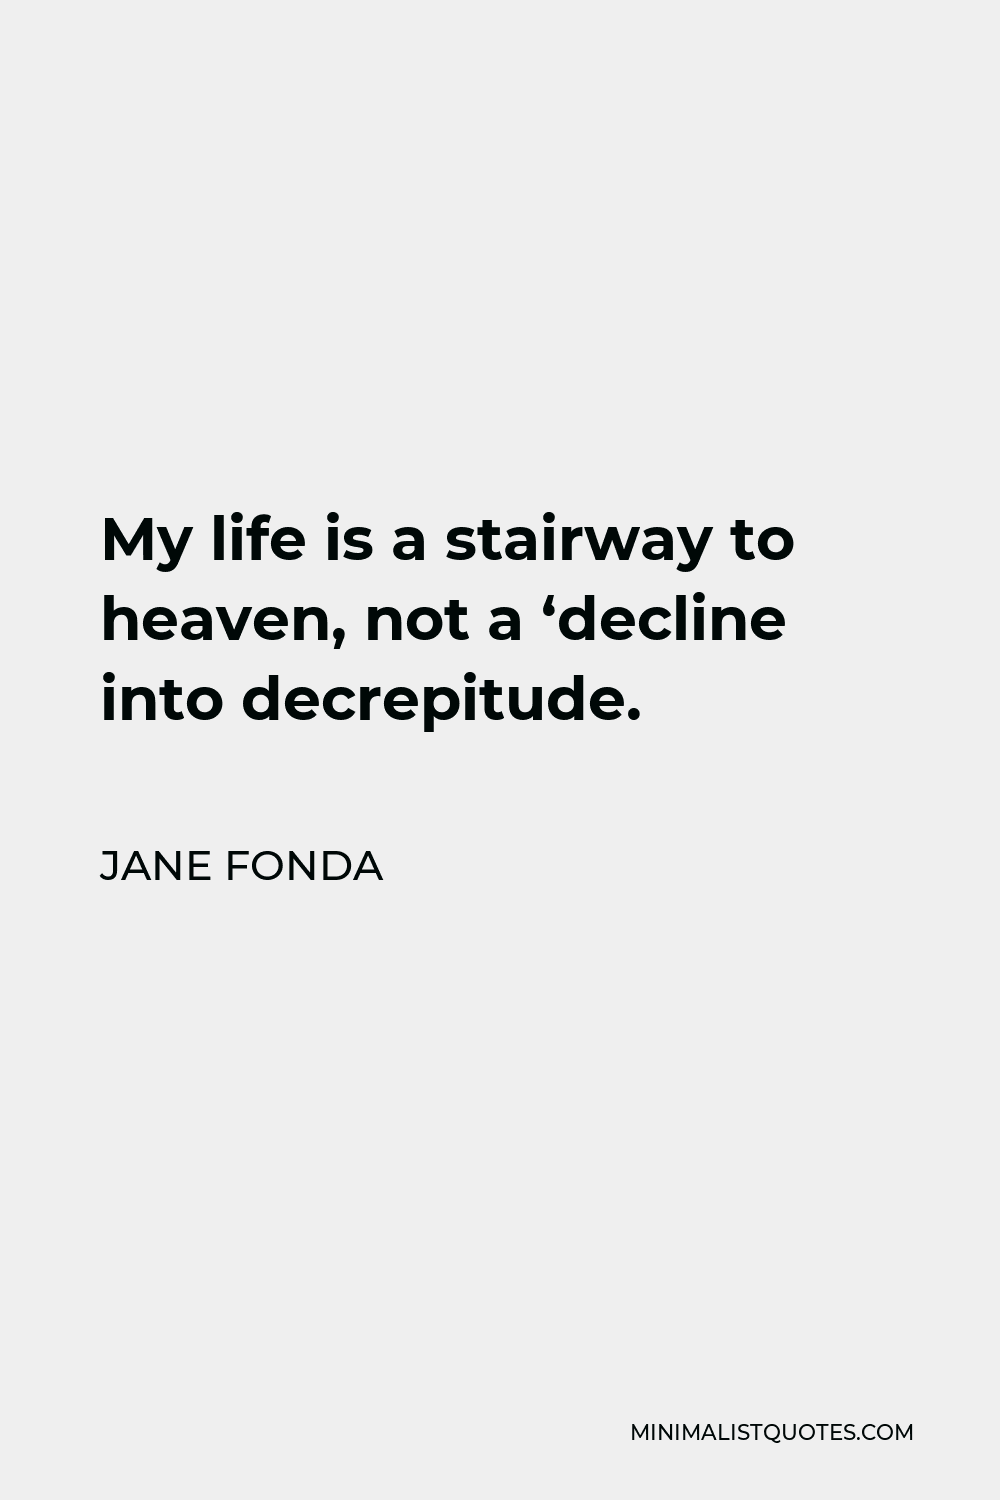 Jane Fonda Quote My Life Is A Stairway To Heaven Not A Decline Into Decrepitude 6359